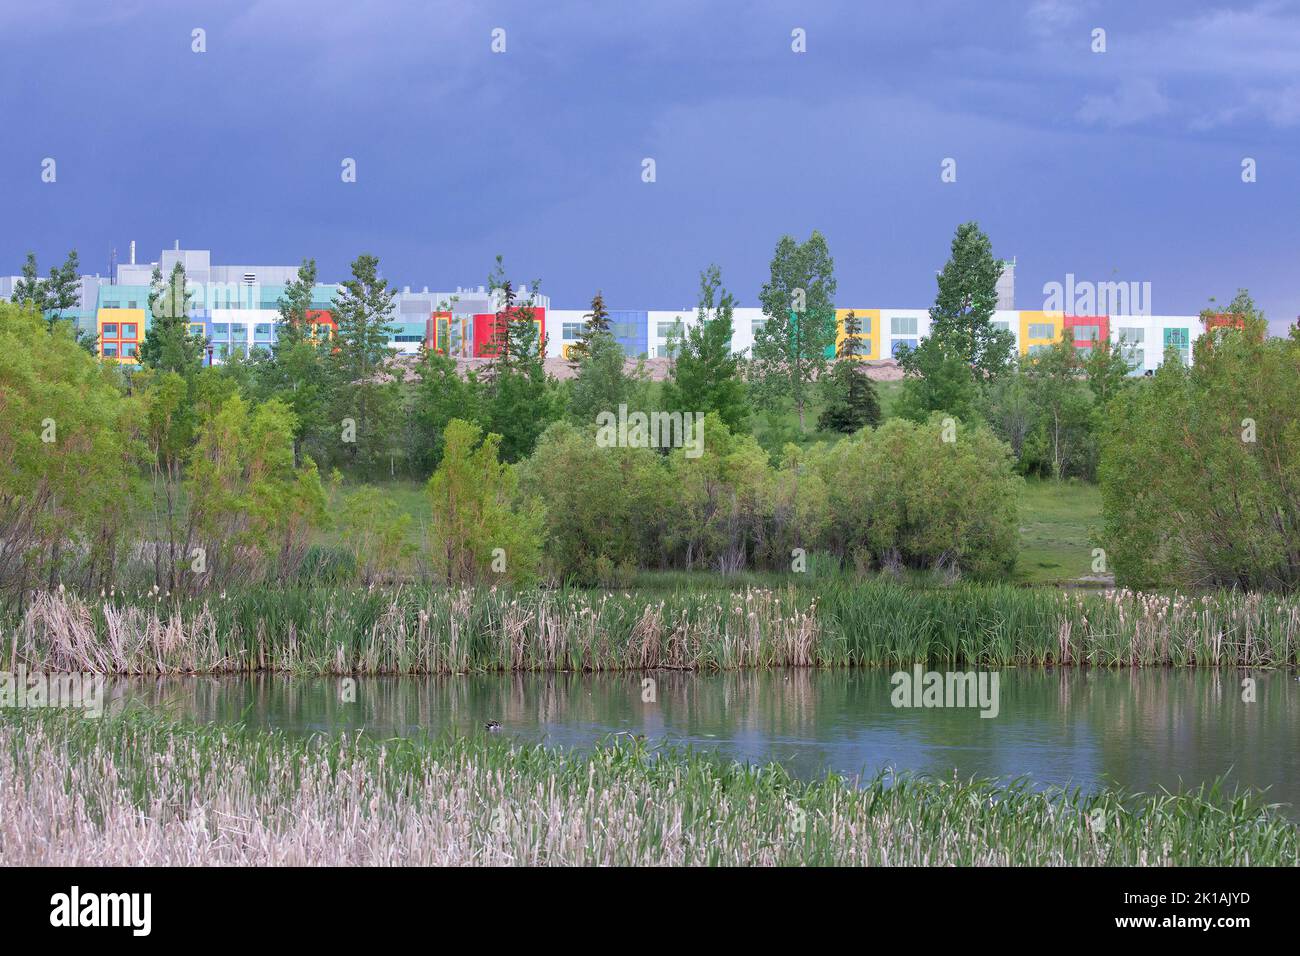 City pond built to capture stormwater, improve water quality and prevent flooding also provides urban park. Alberta Children's Hospital in back. Stock Photo